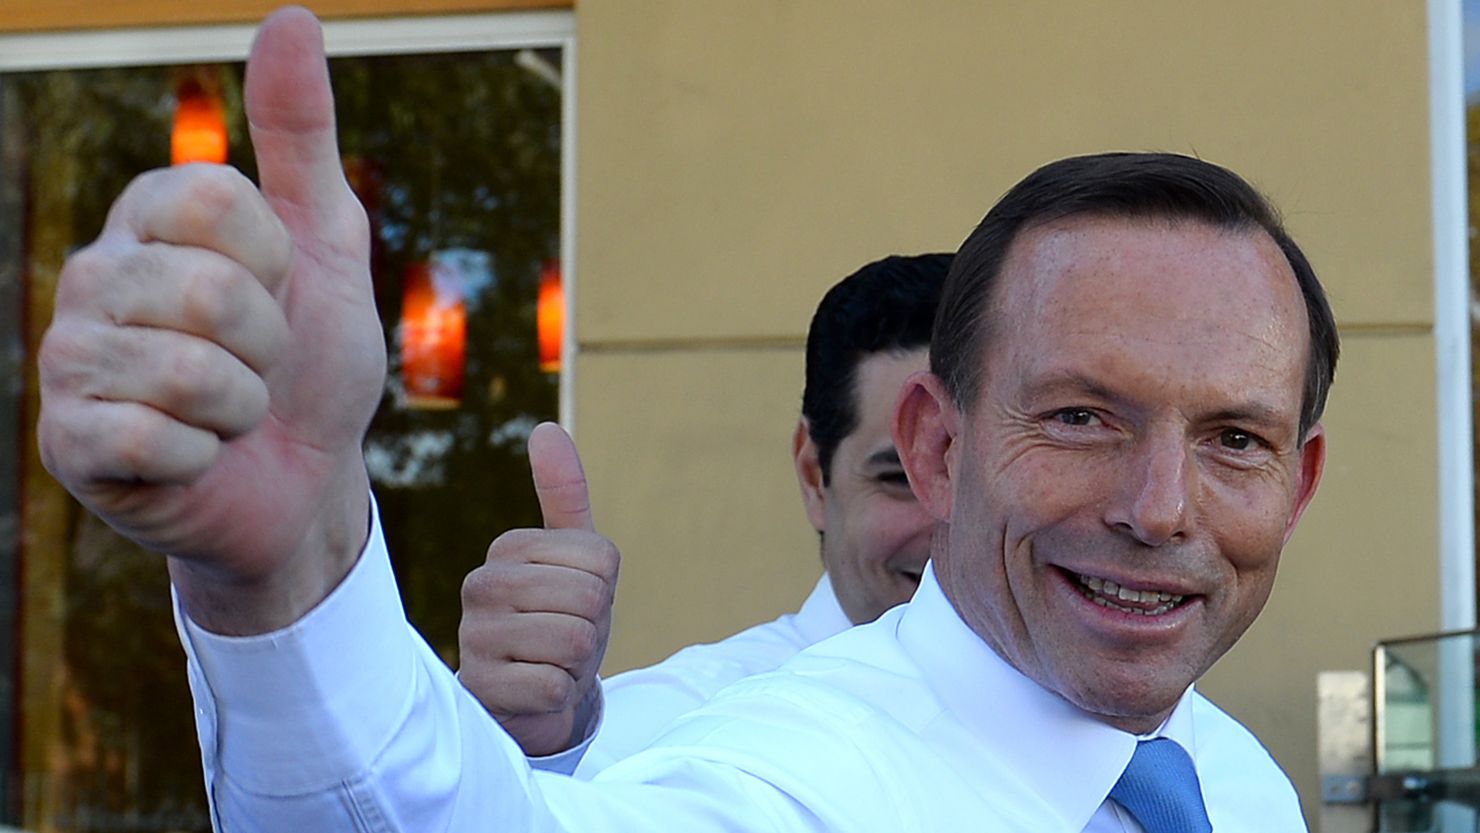 Opposition leader Tony Abbott, a populist conservative, is known as a pugnacious presence in Australian politics.